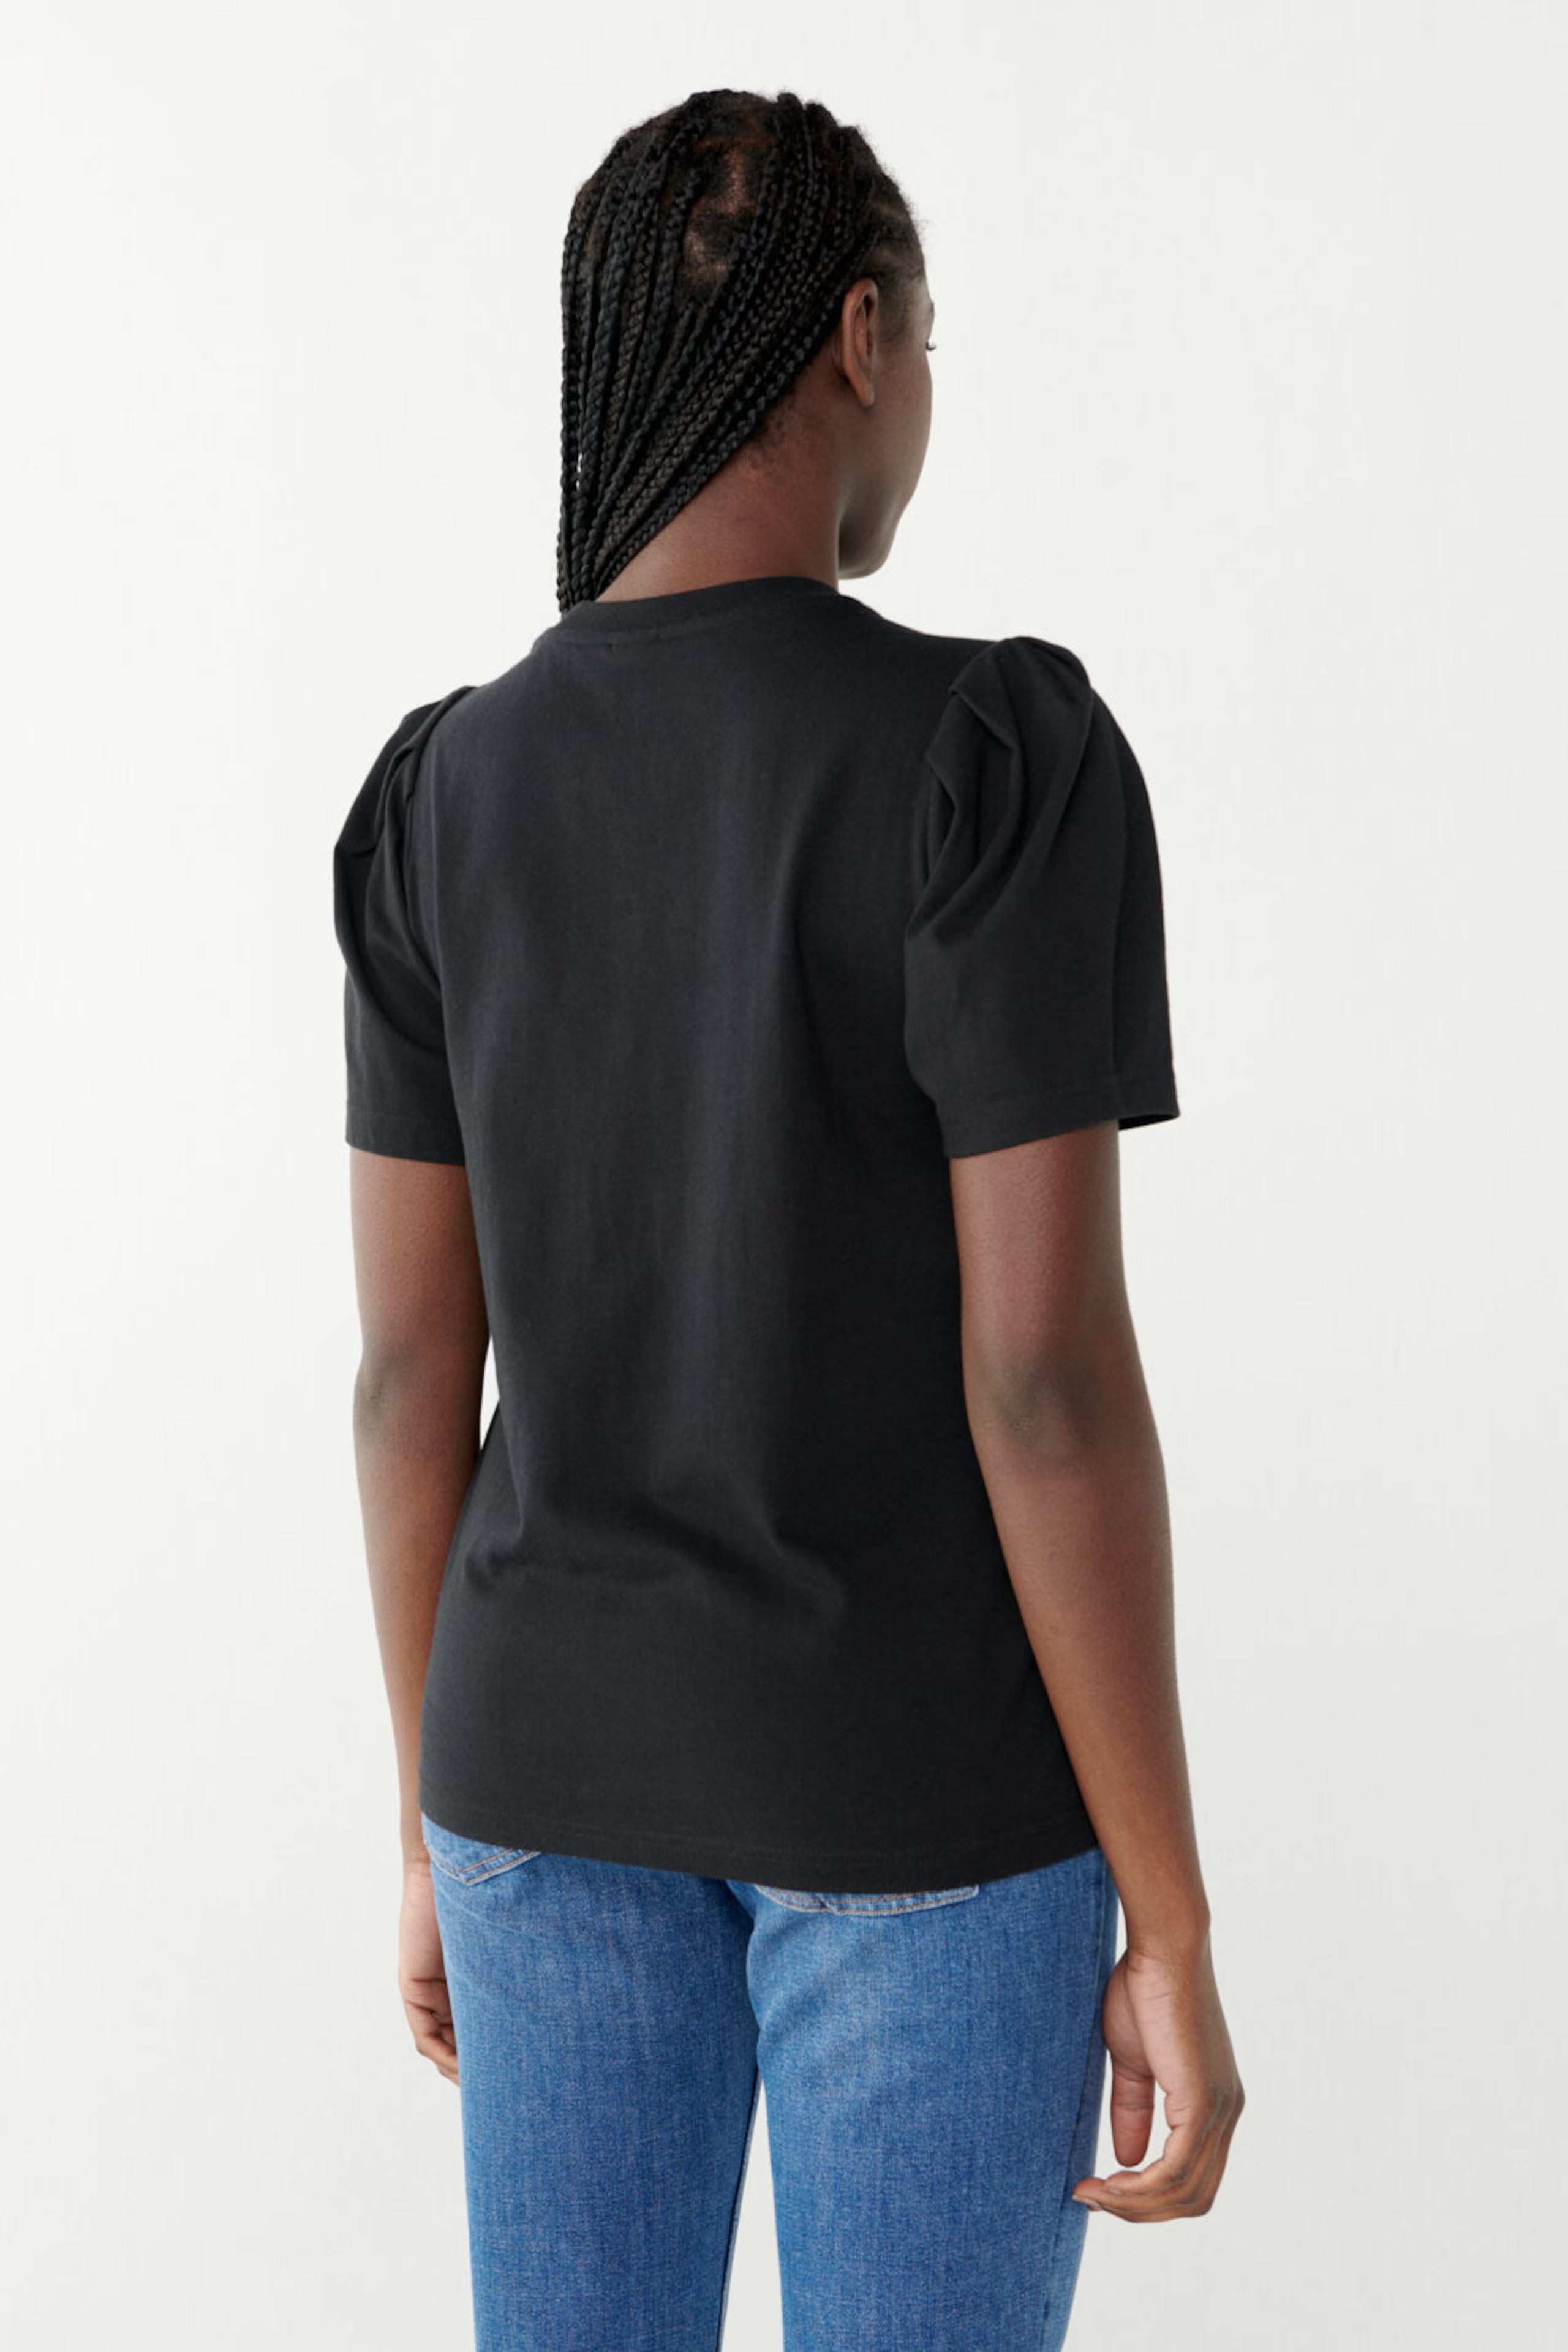 The back view of a woman wearing an Isa Puff Sleeve Tee - Black made from organic cotton by Twist & Tango.